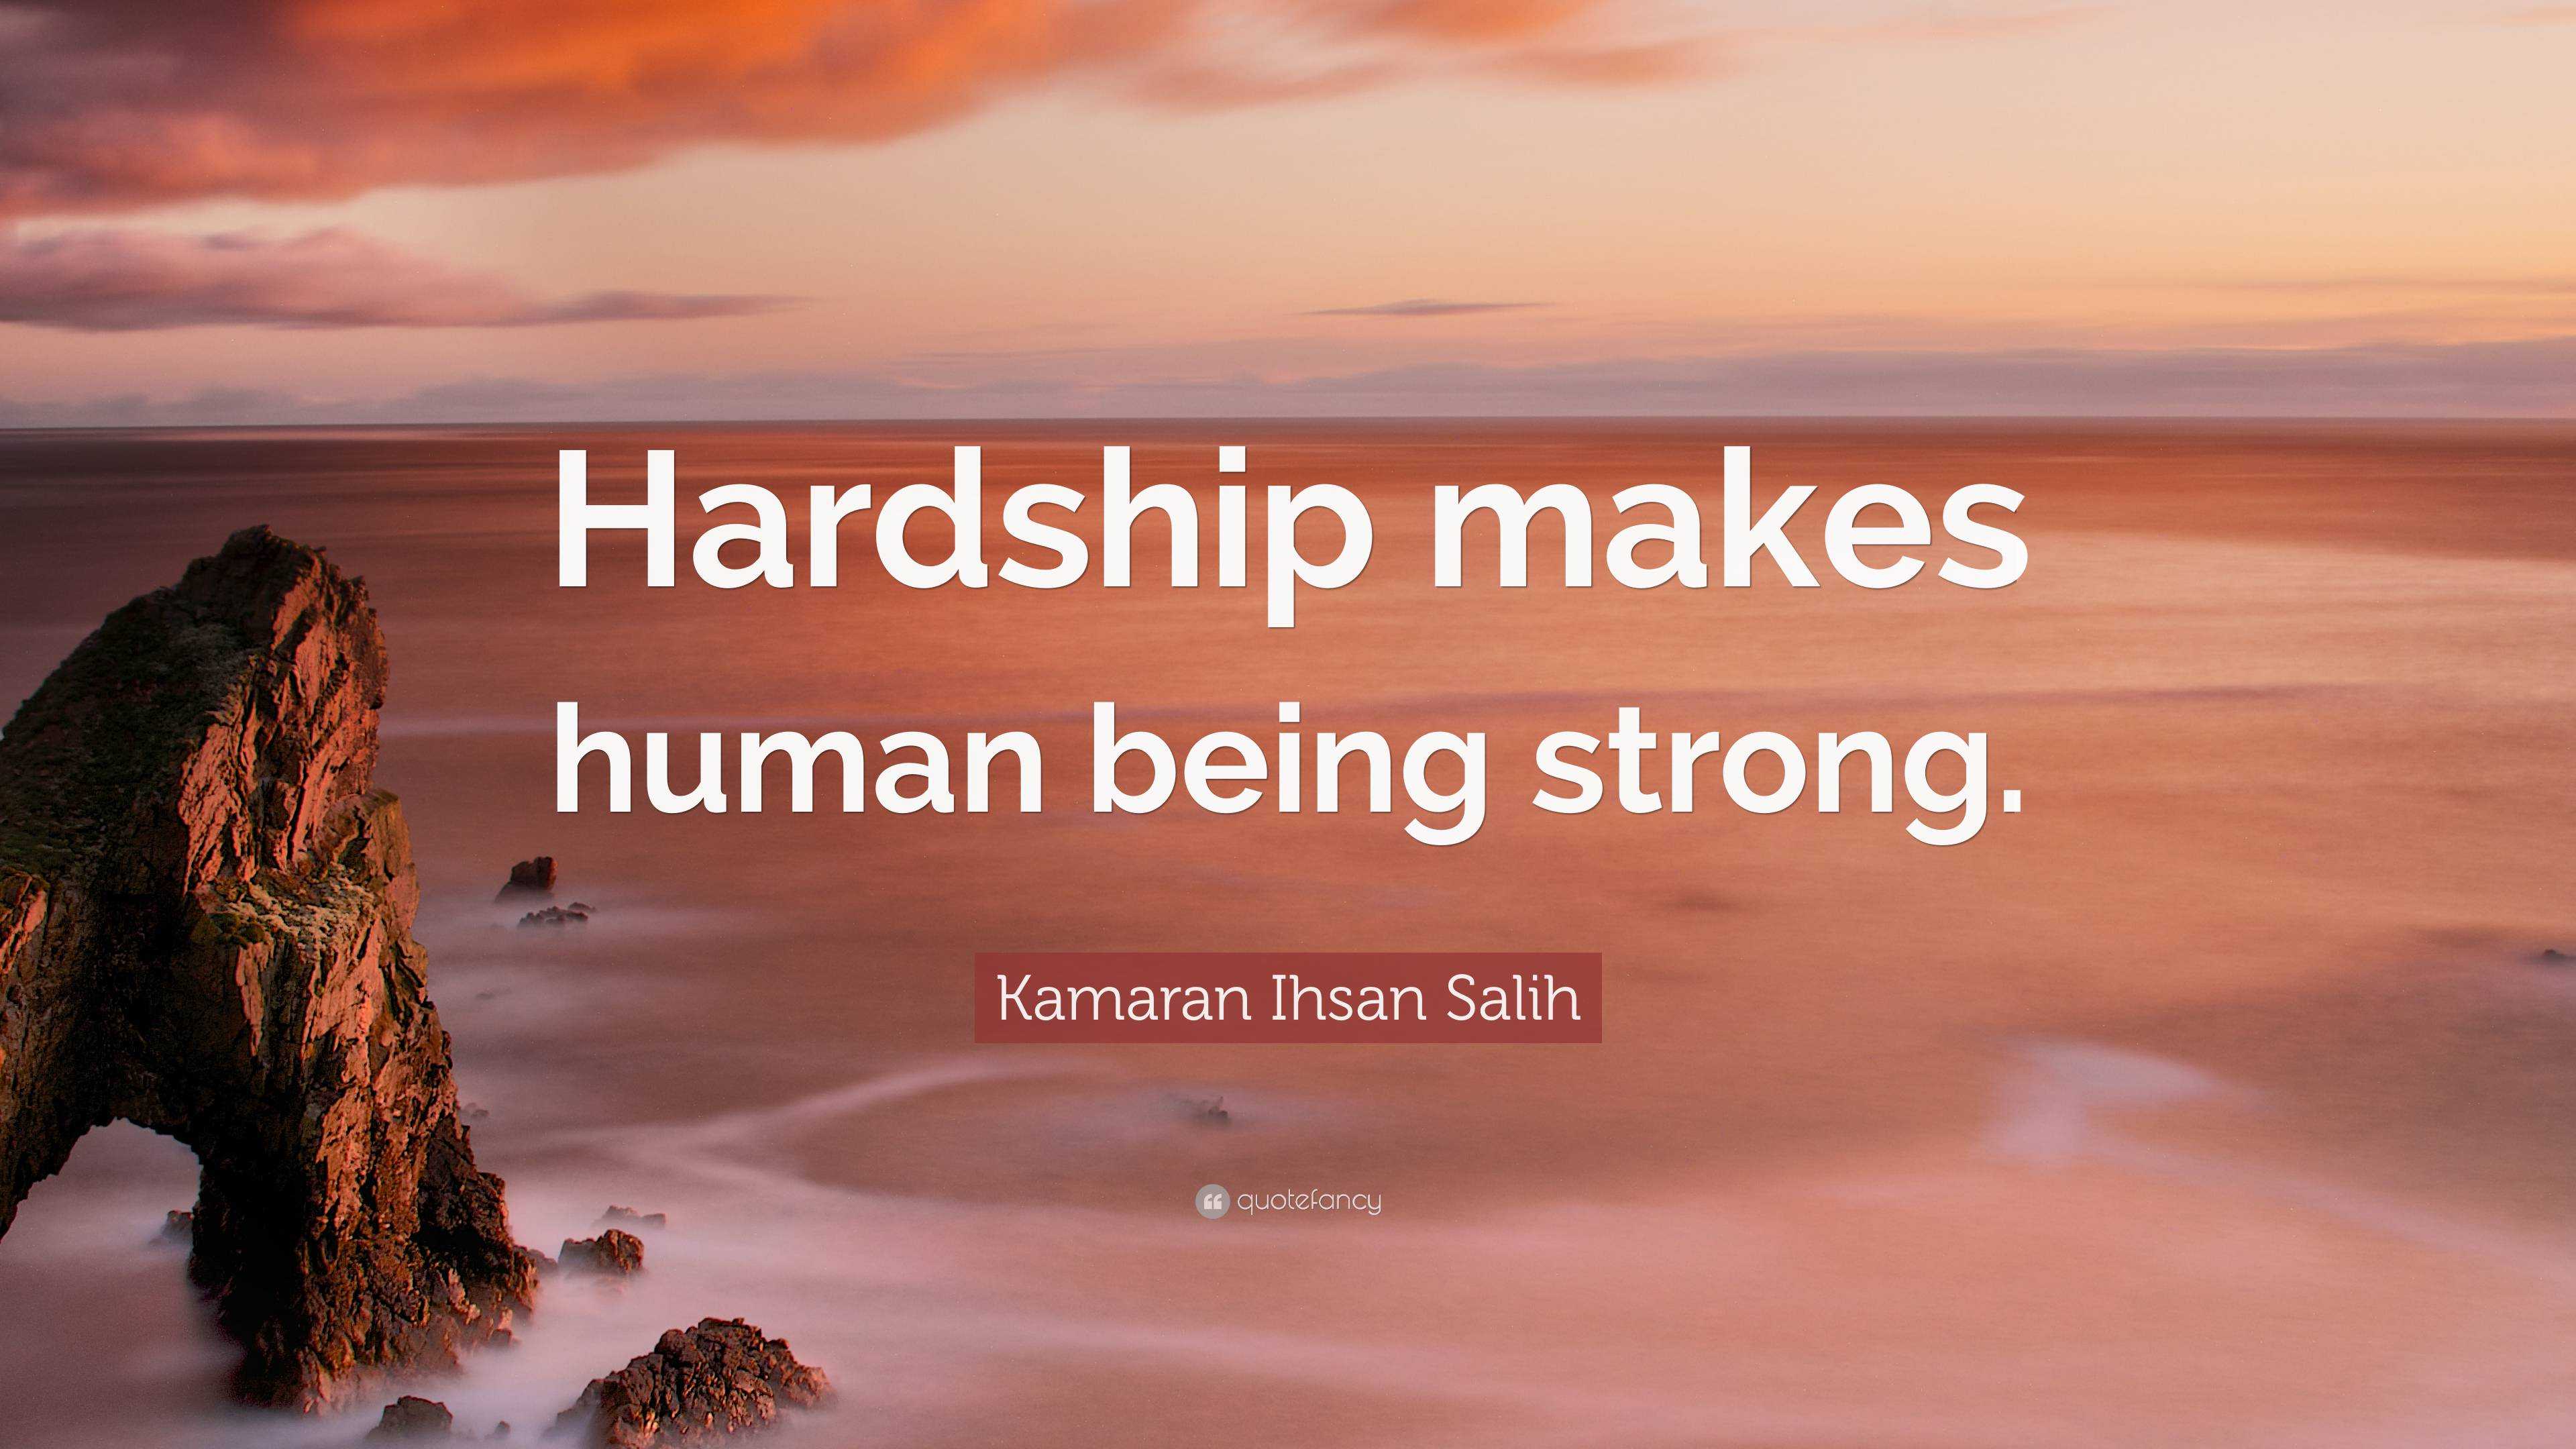 quotes #hardship #courage #willpower | Love